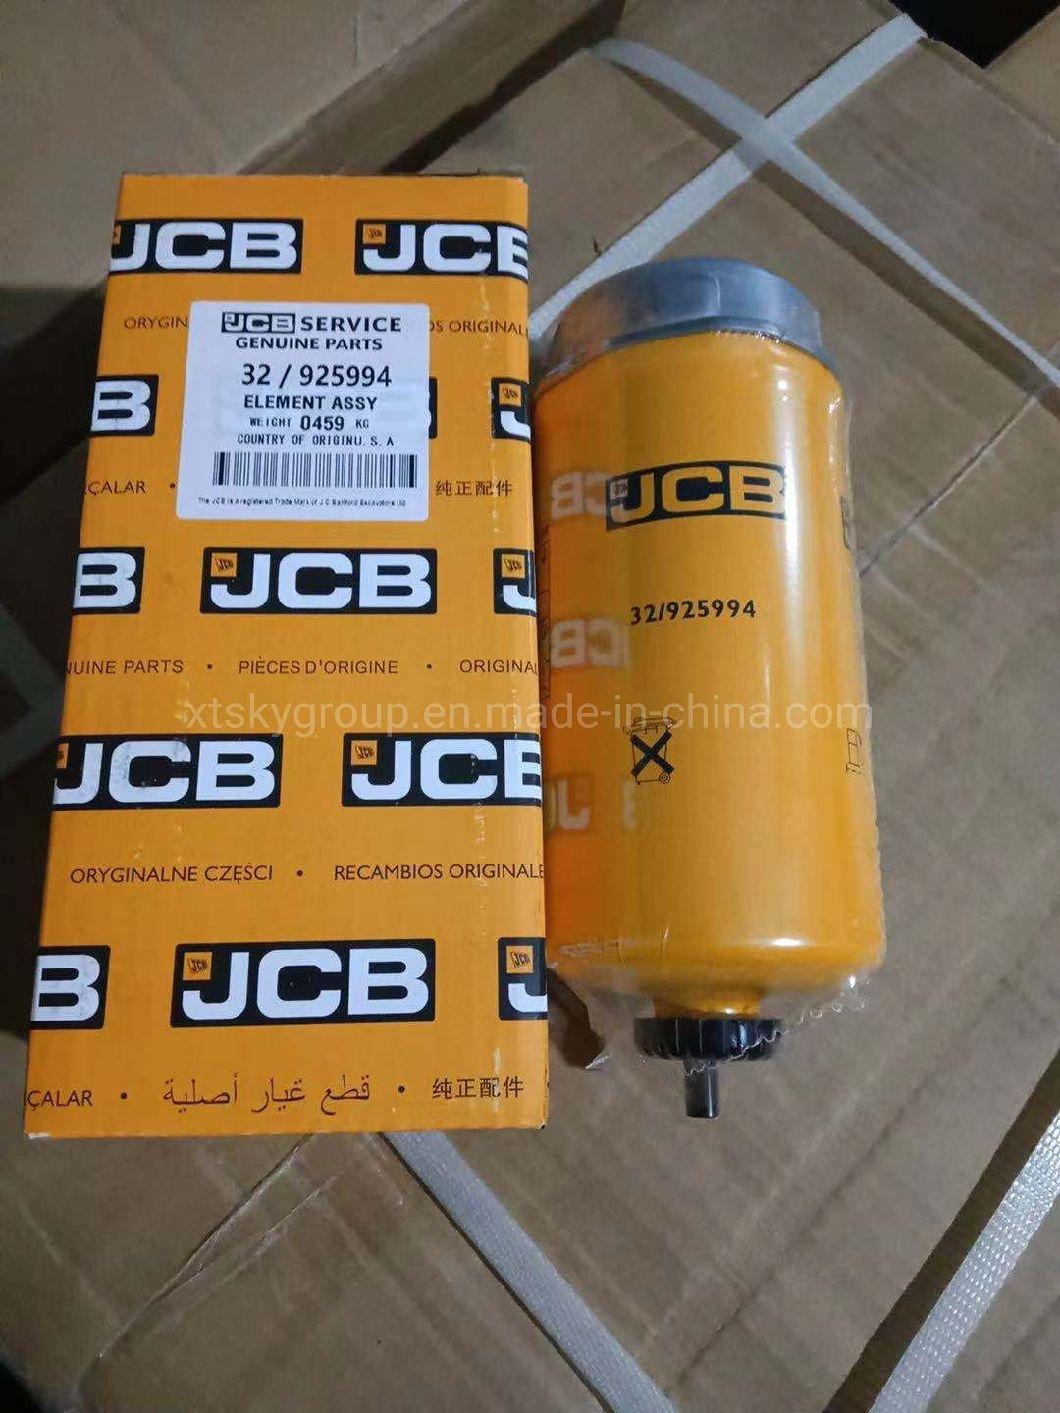 Oil Filter and Air Filter for Truck/Heavy Equipment